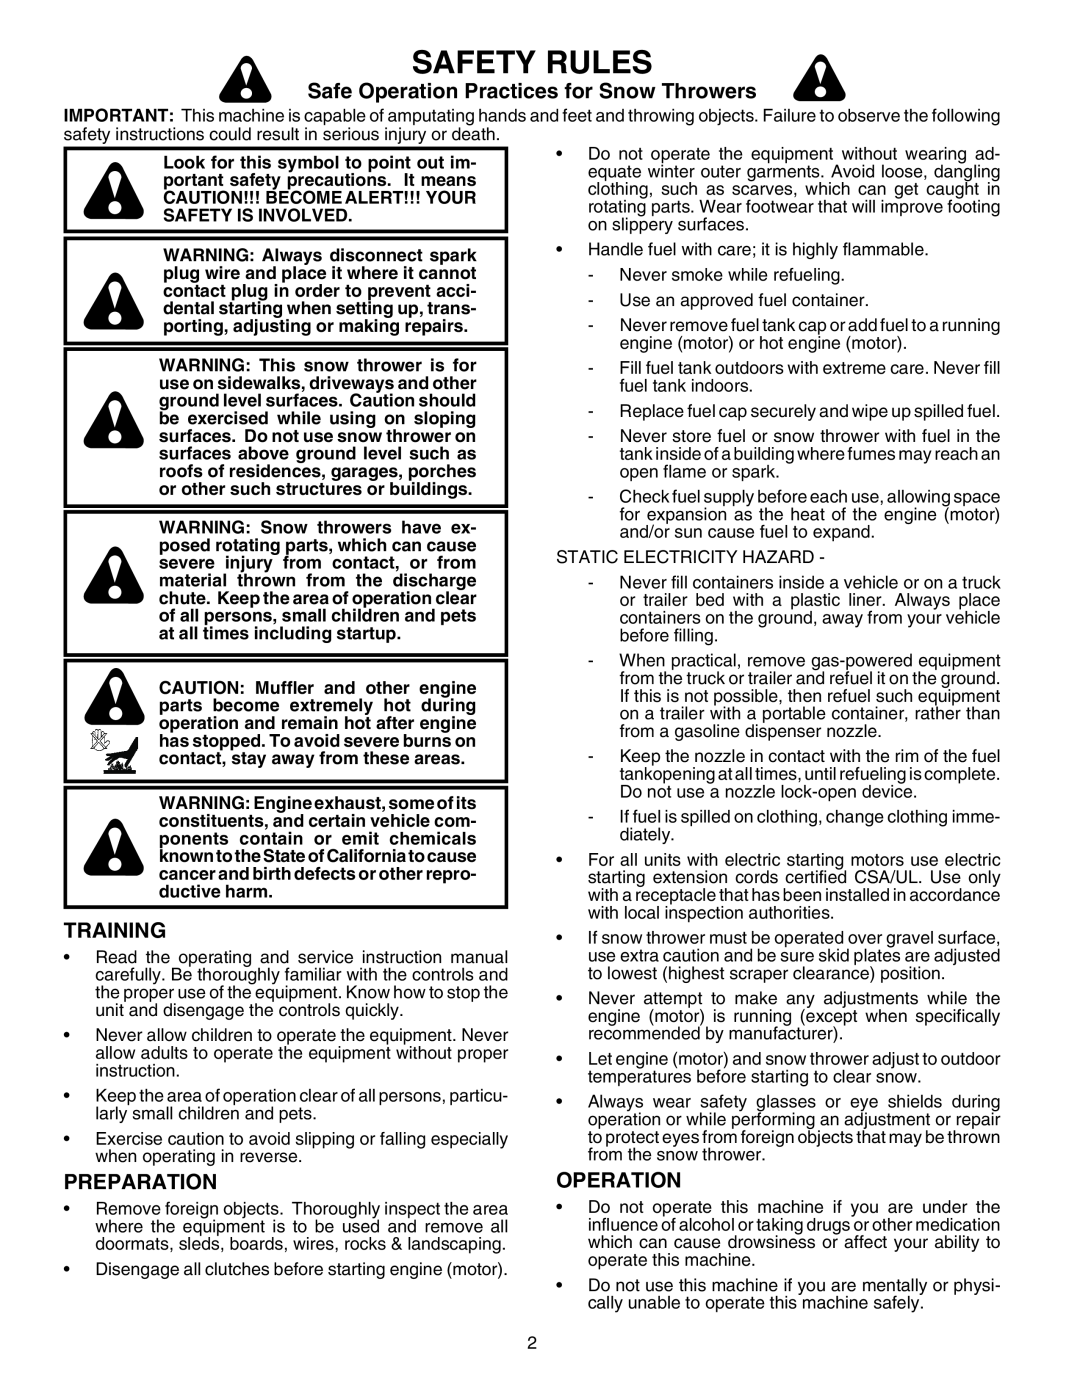 Husqvarna 8024ST owner manual Safety Rules, Safe Operation Practices for Snow Throwers, Training, Preparation 